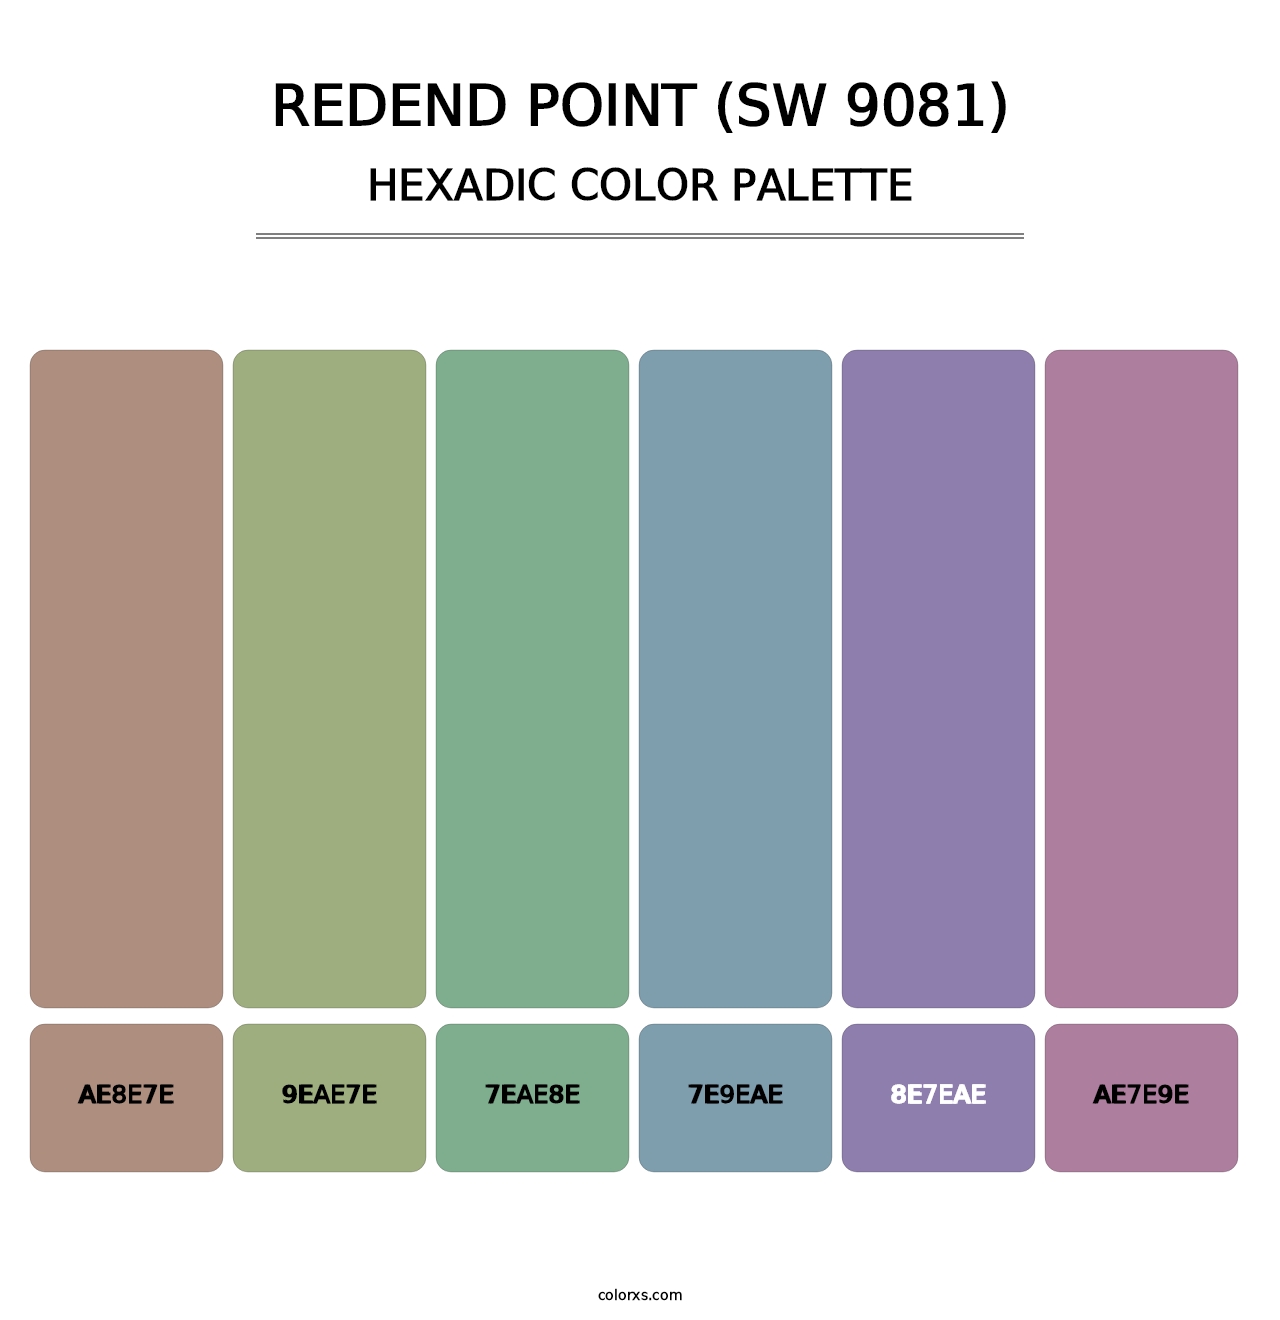 Redend Point (SW 9081) - Hexadic Color Palette